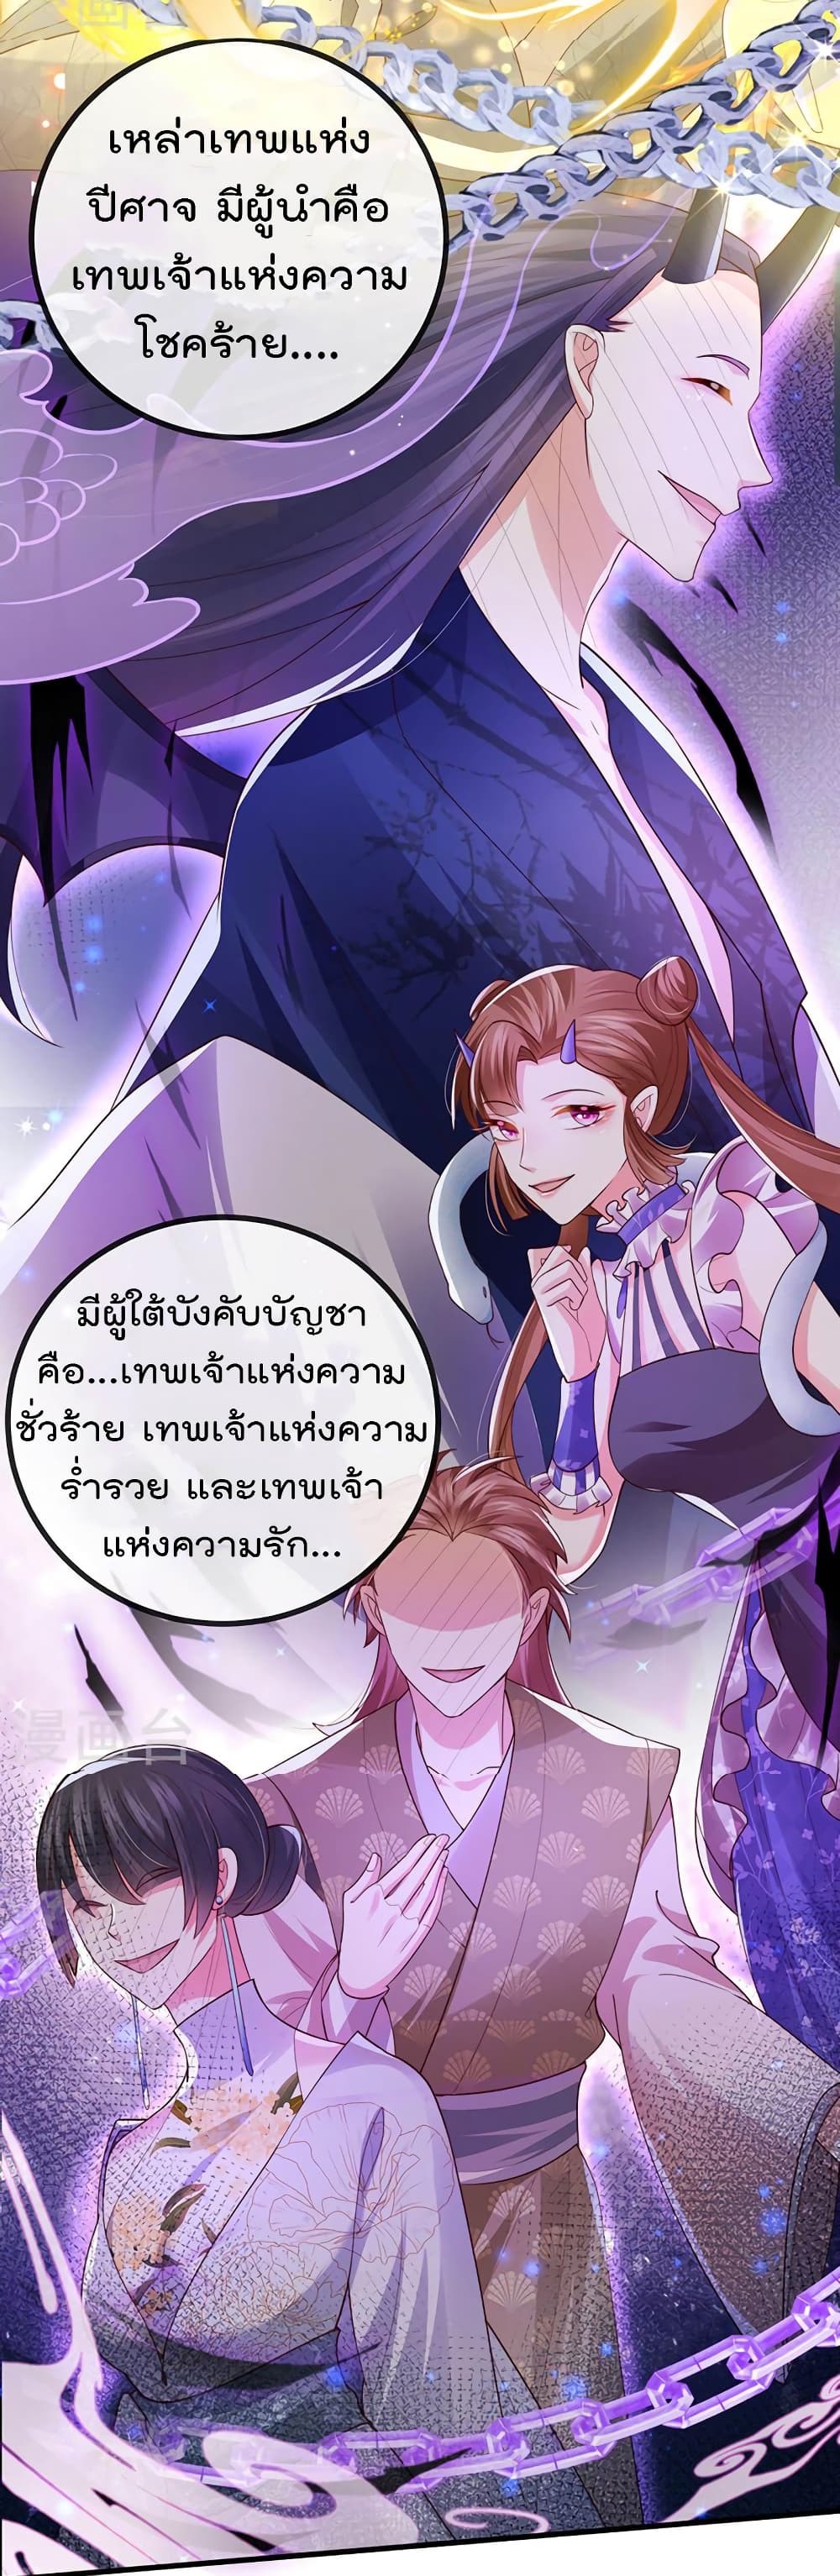 One Hundred Ways to Abuse Scum ตอนที่ 68 (13)